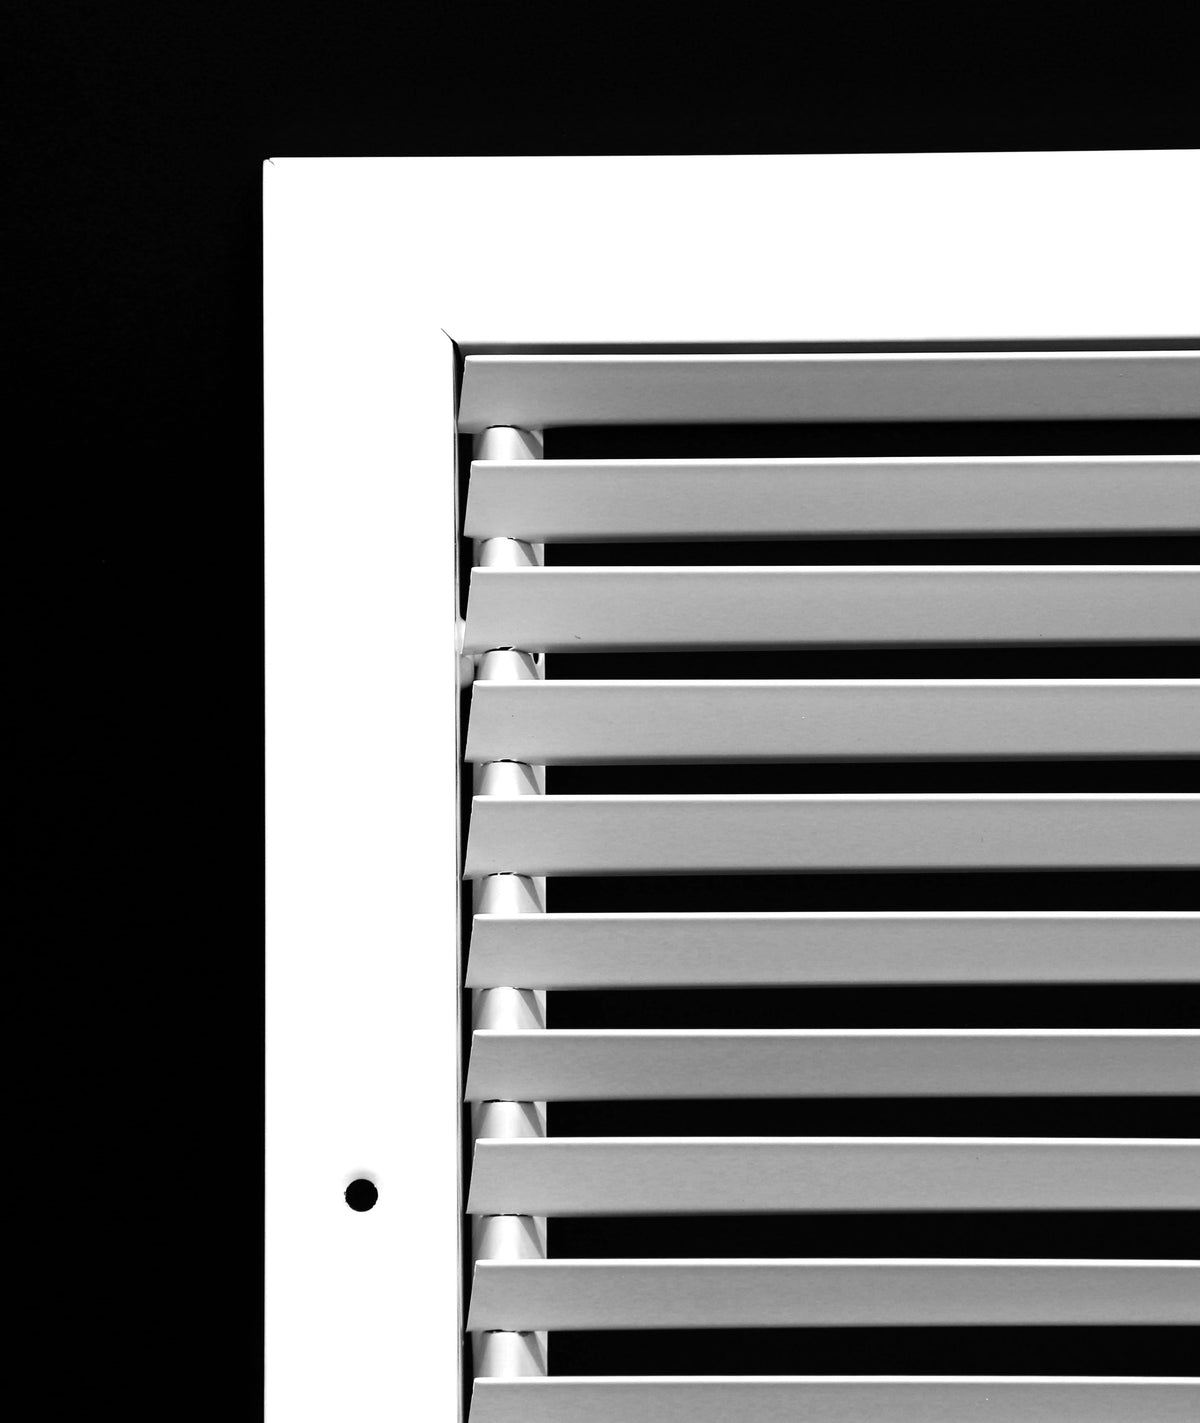 16&quot; x 16&quot; Fixed Bar Return Grille - Sidewall and Ceiling